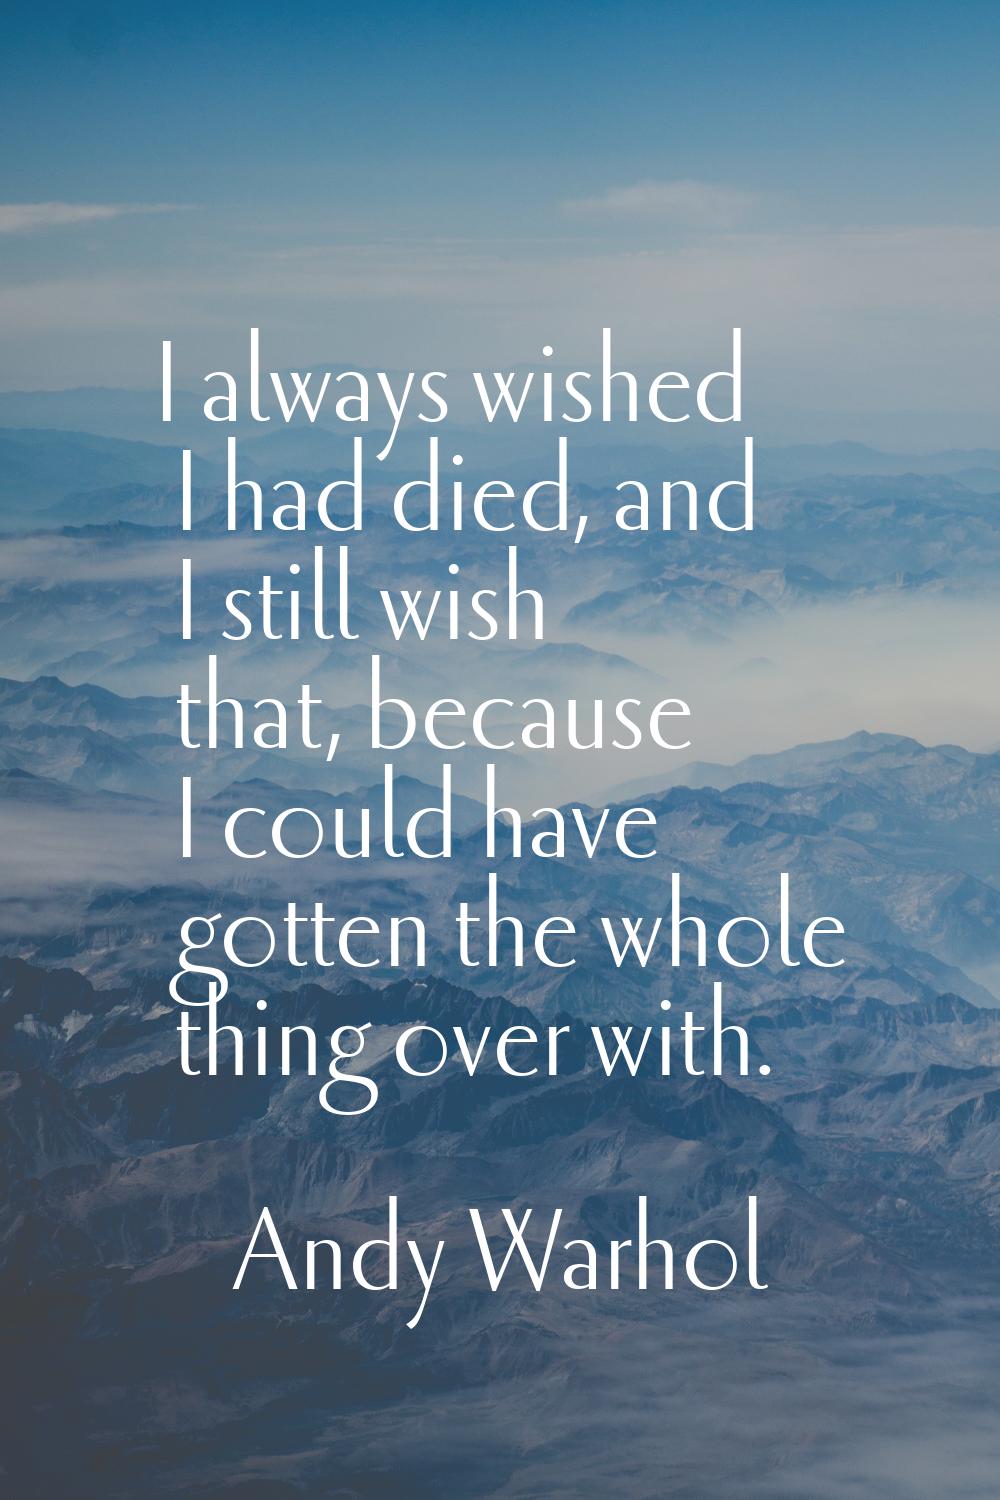 I always wished I had died, and I still wish that, because I could have gotten the whole thing over